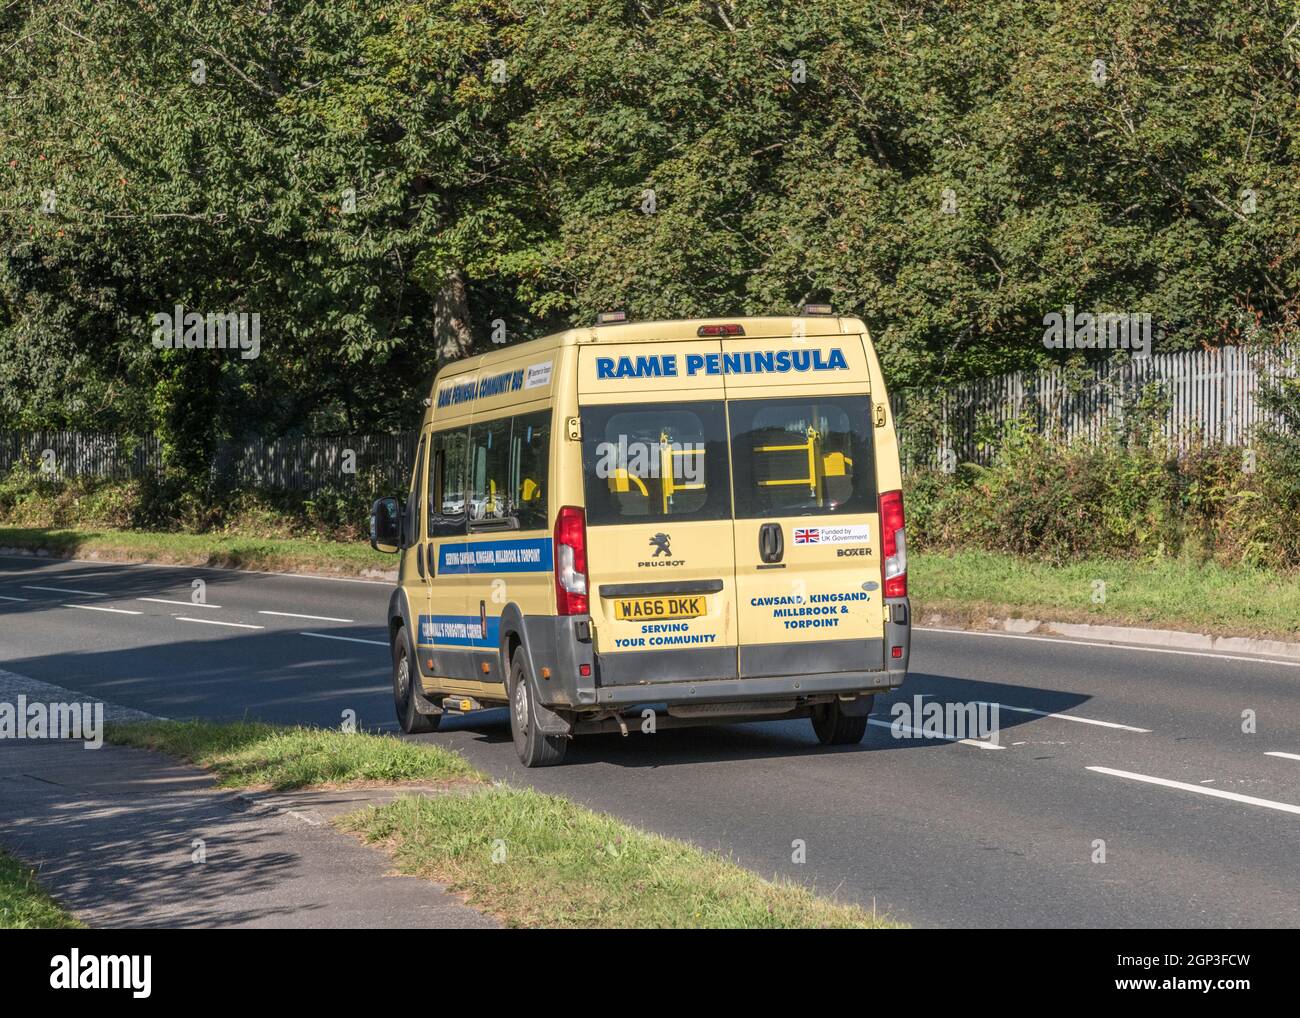 Local Rame Peninsula communiy minibus travelling downhill on a country road. For local community transport schemes, getting around the country. Stock Photo